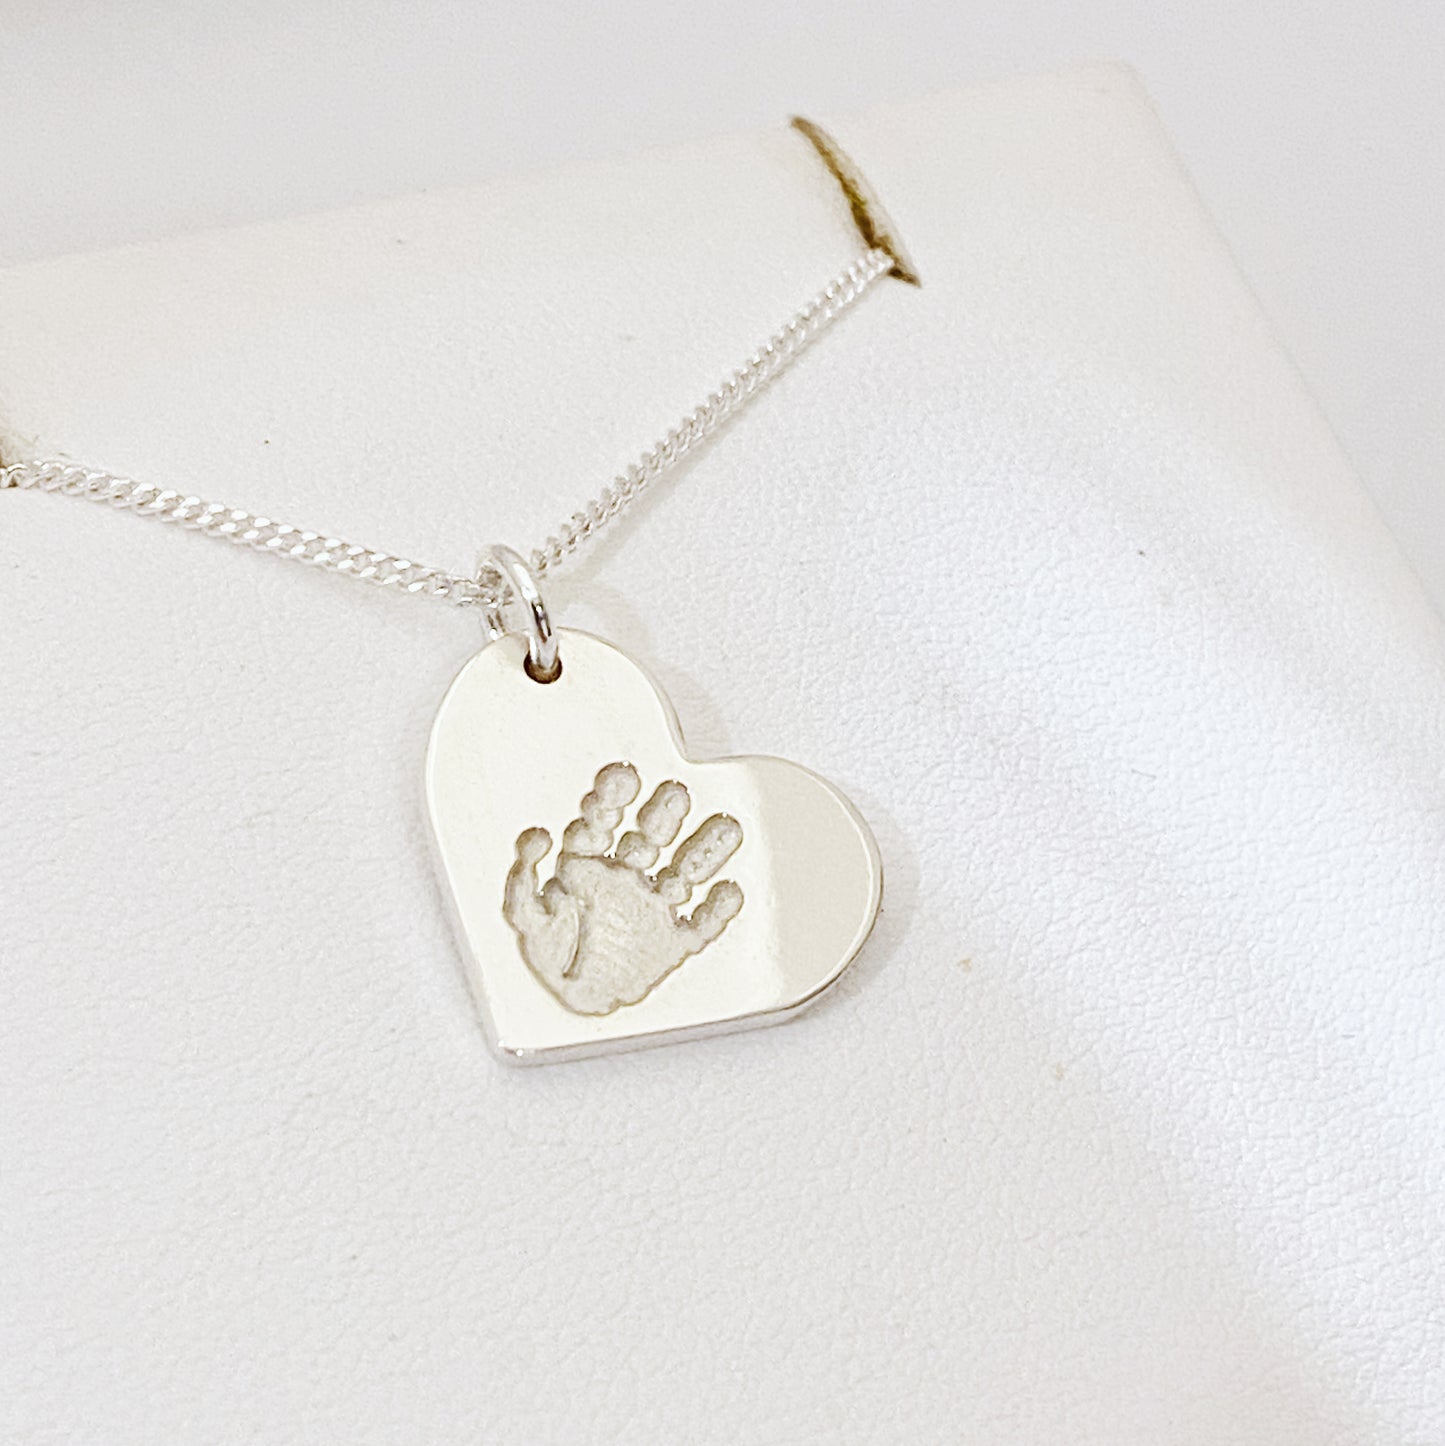 Small modern handprint Jewellery, use your babies, pet or loved ones hand or footprint. Made in New Zealand from sterling Silver